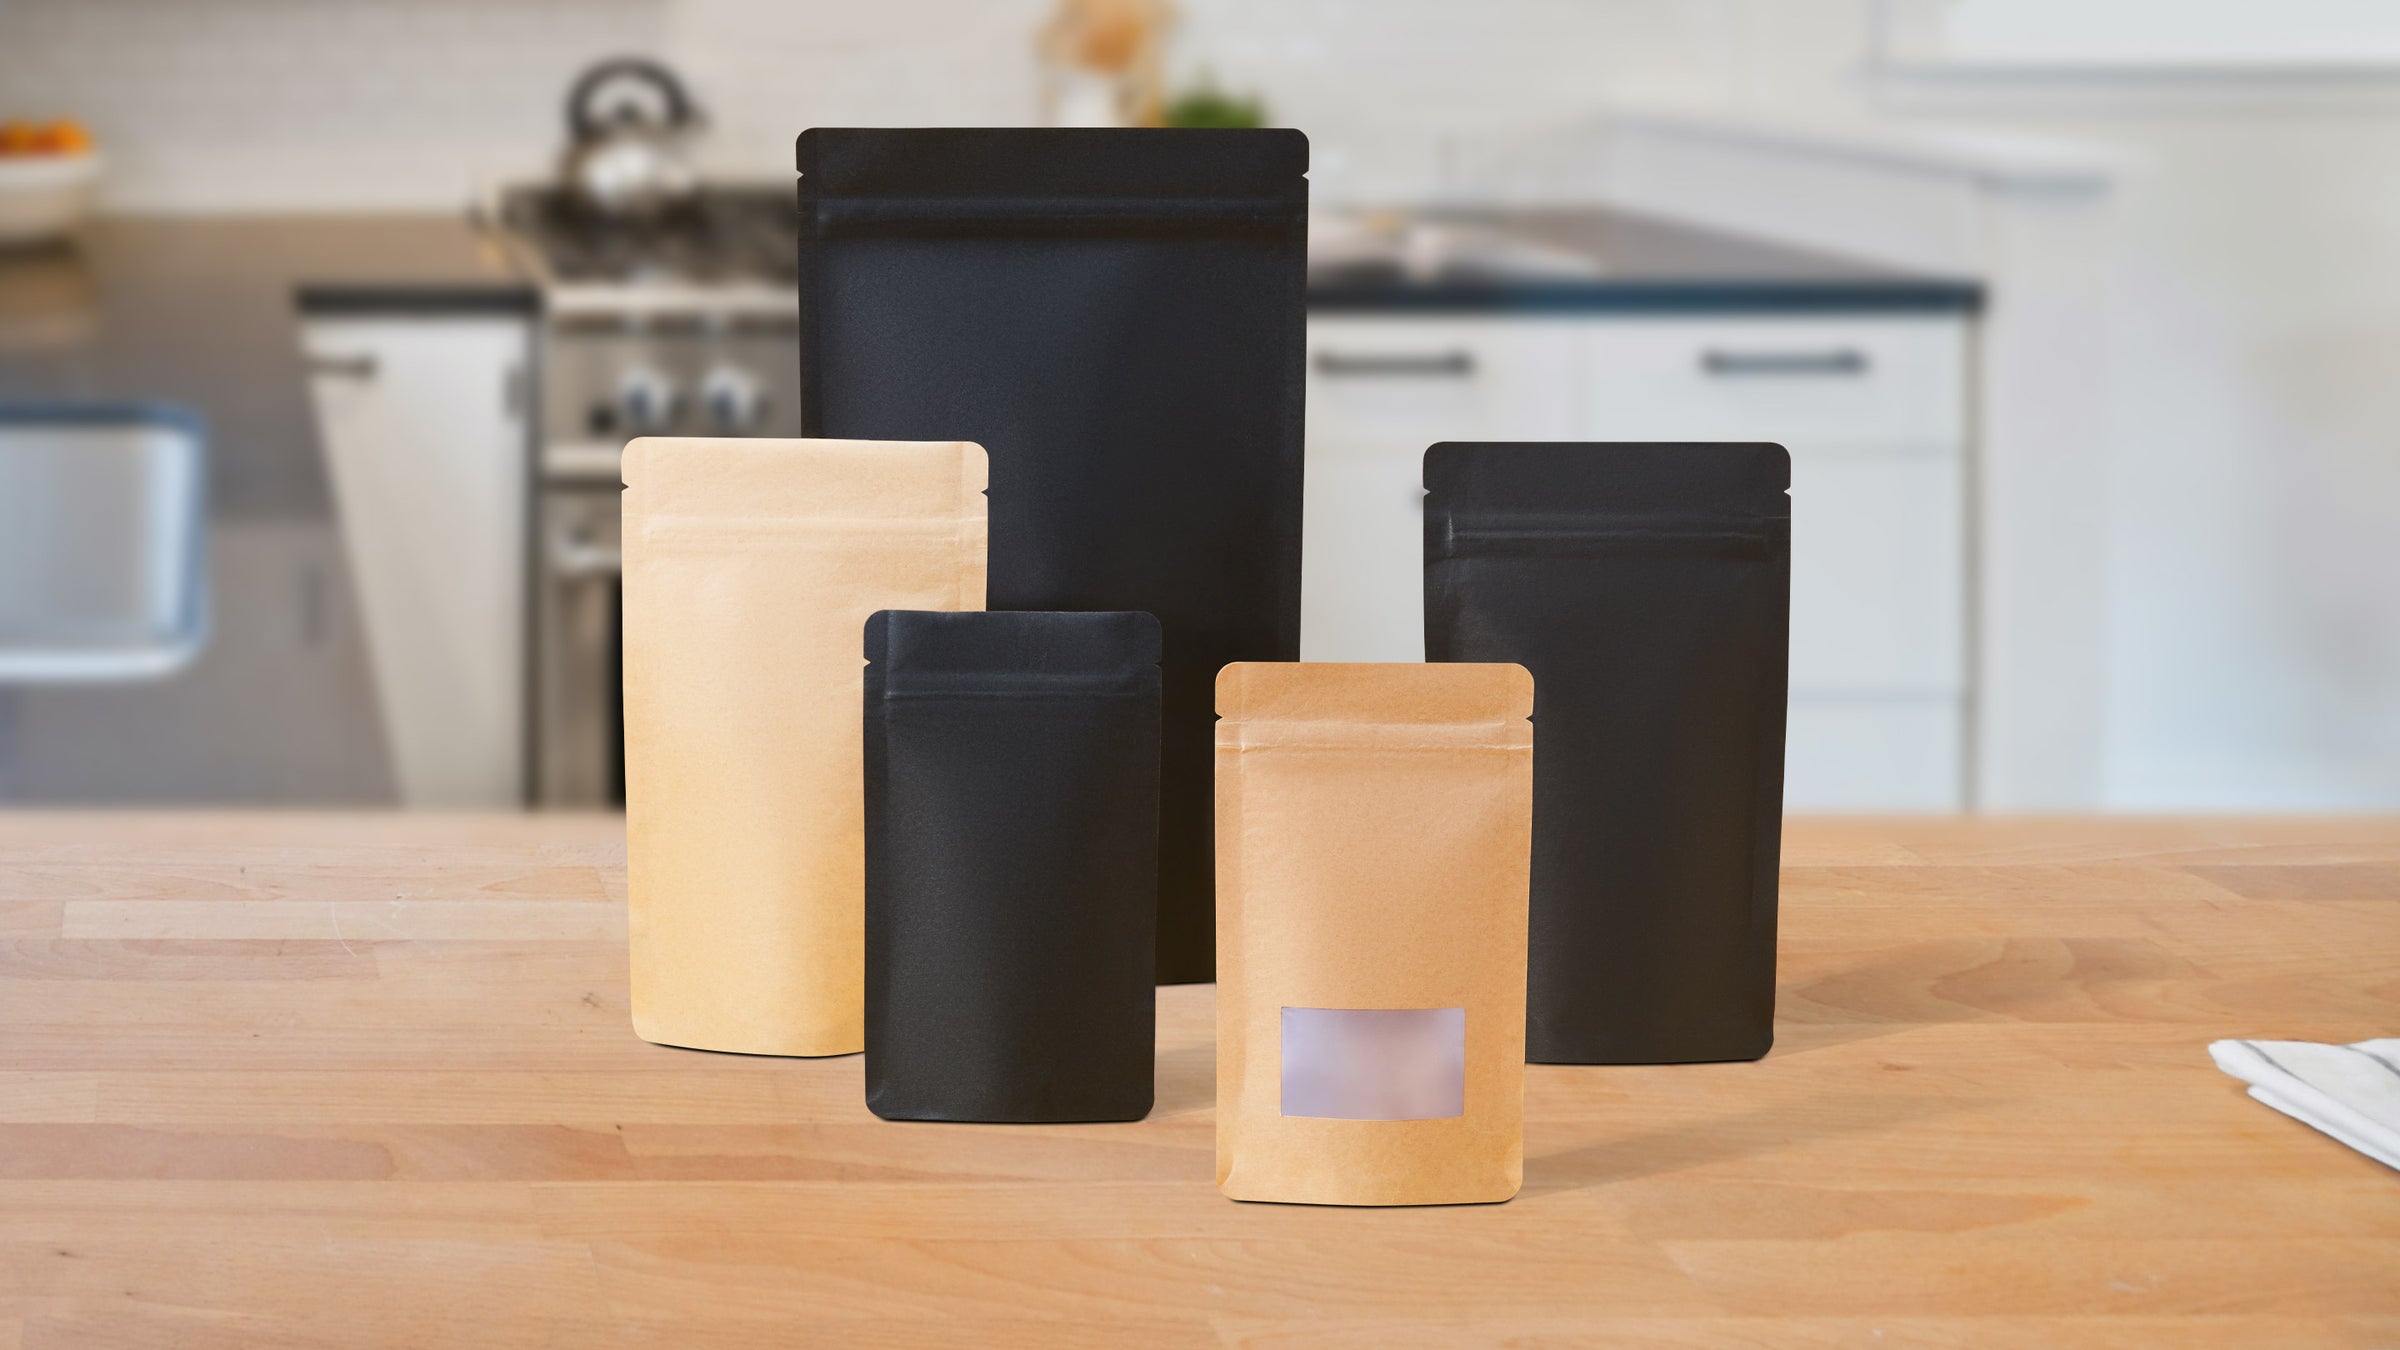 Biodegradable stand-up pouch (Doy Packs) packaging in a kitchen setting.